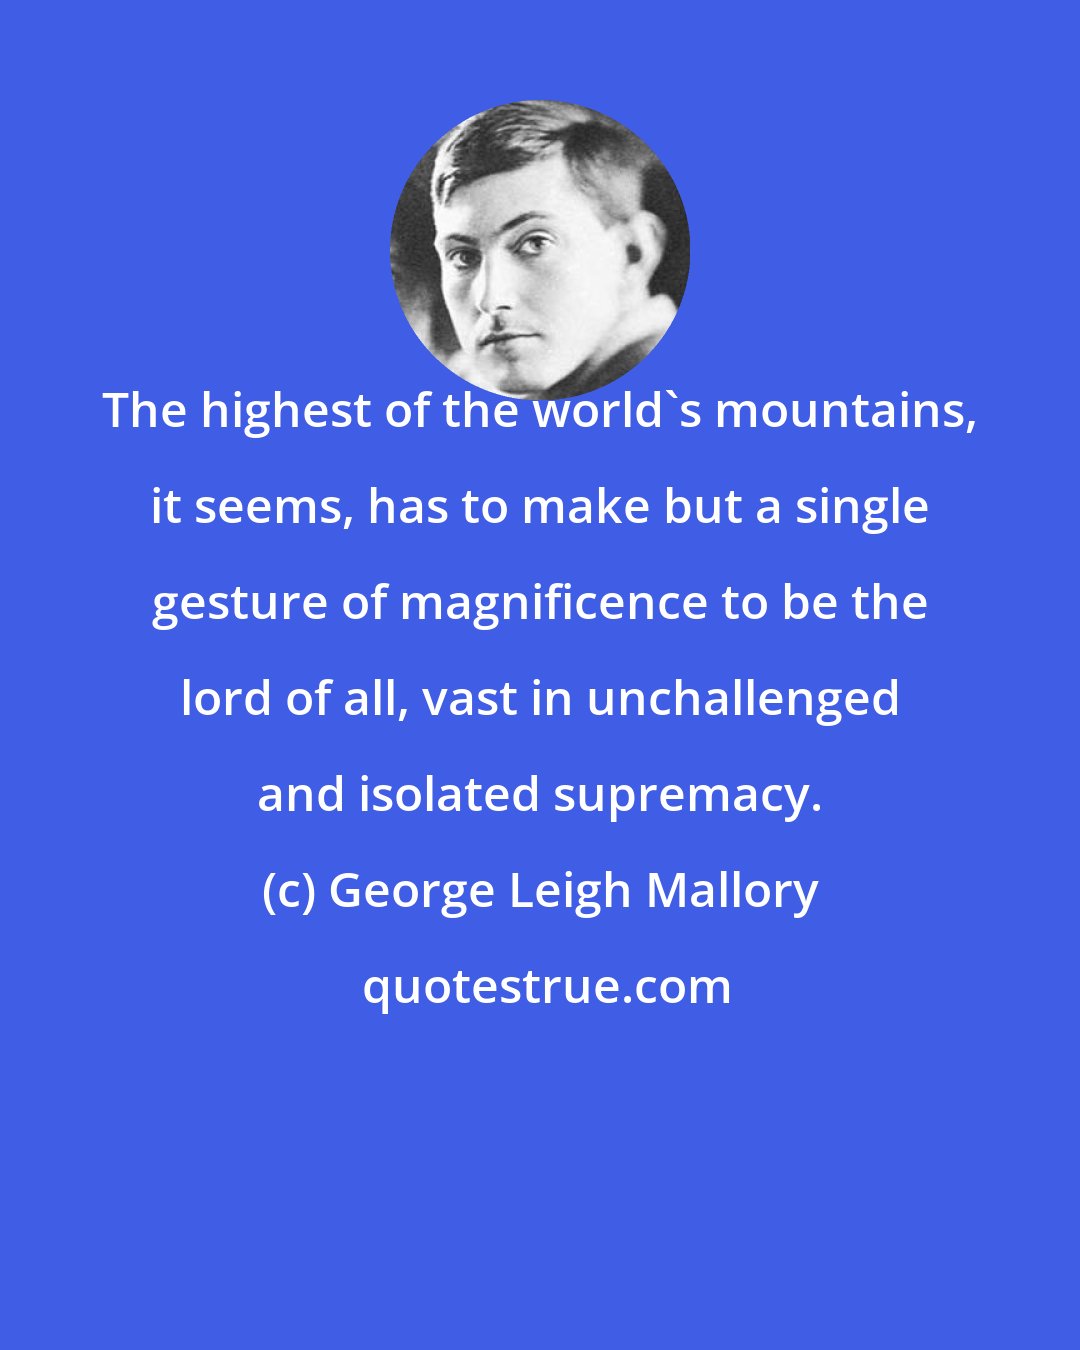 George Leigh Mallory: The highest of the world's mountains, it seems, has to make but a single gesture of magnificence to be the lord of all, vast in unchallenged and isolated supremacy.